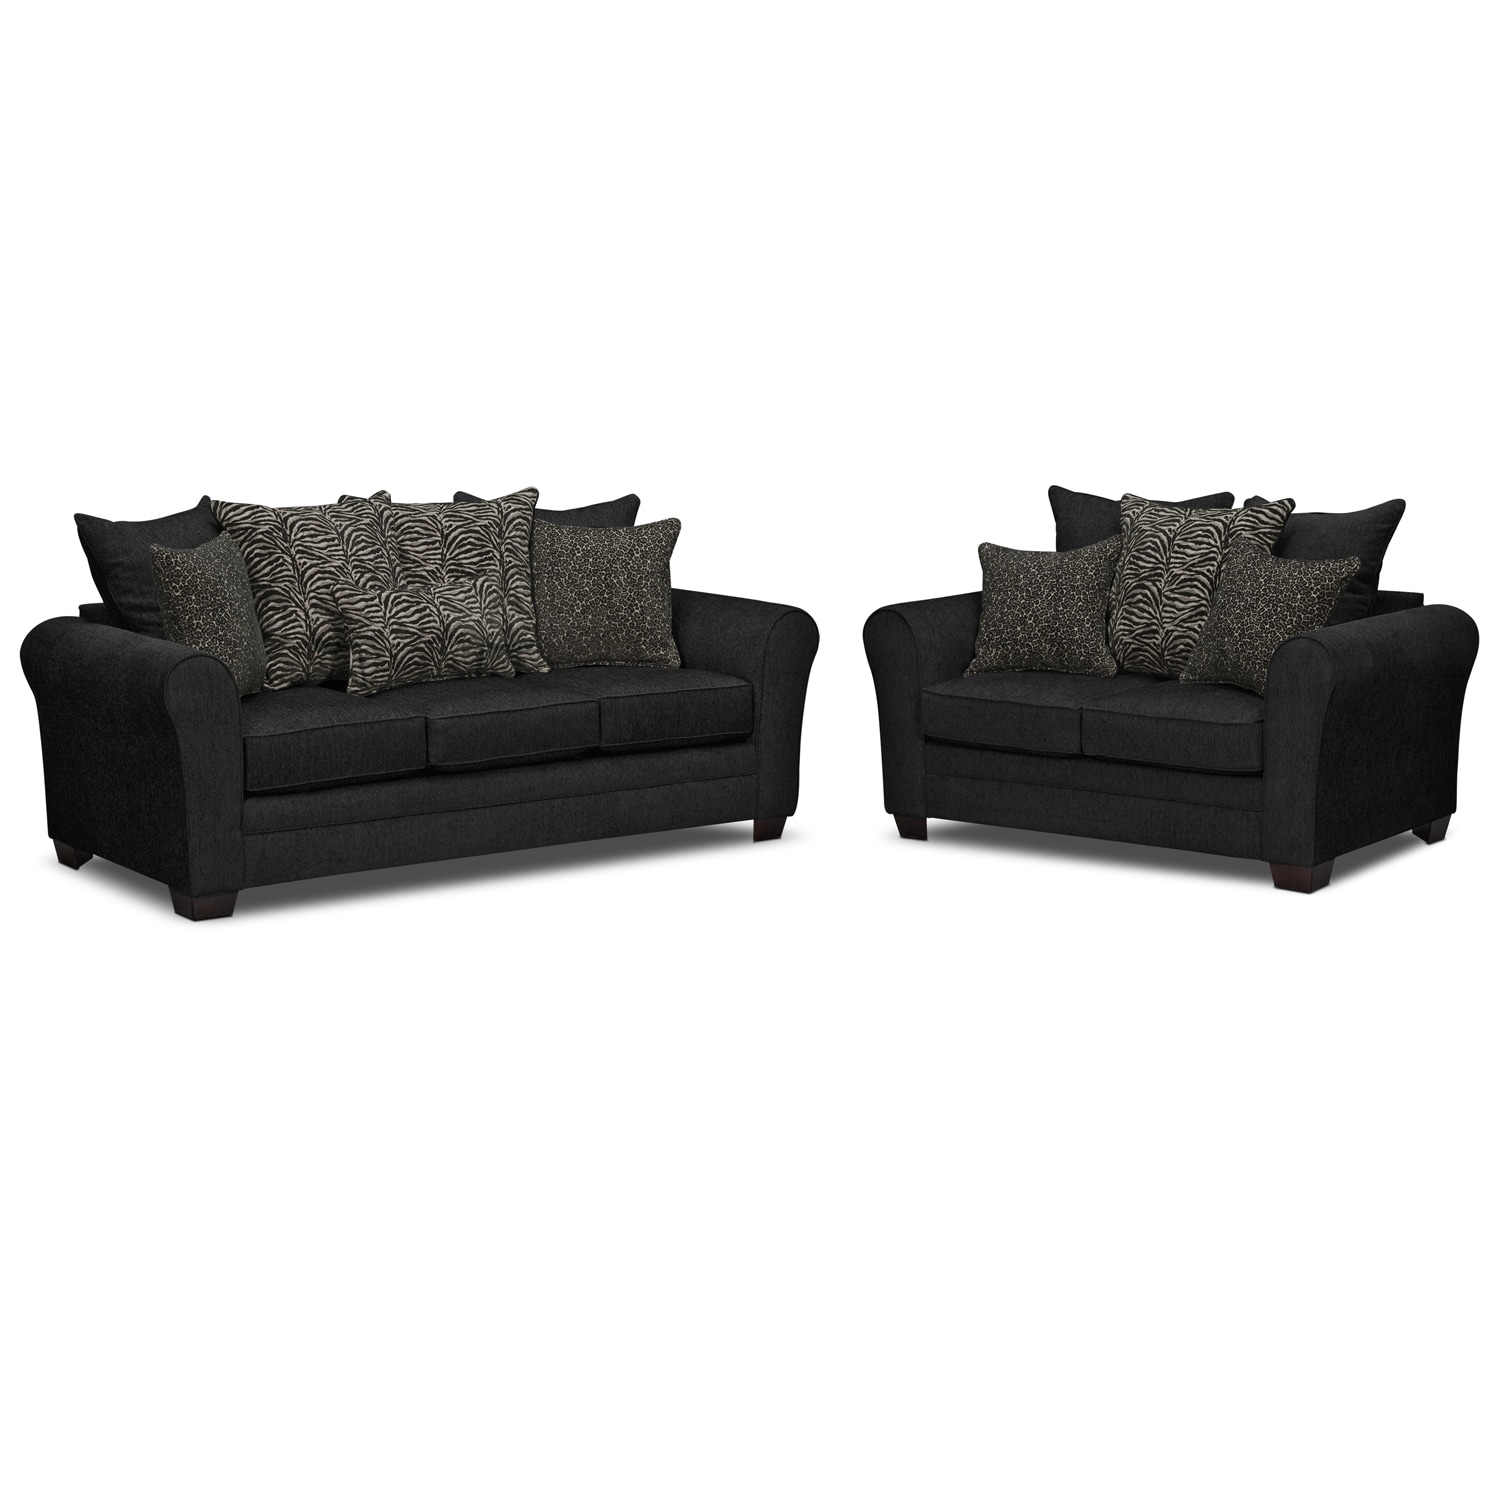  upholstery 2 pc living room value city furniture 2 pc living room title=